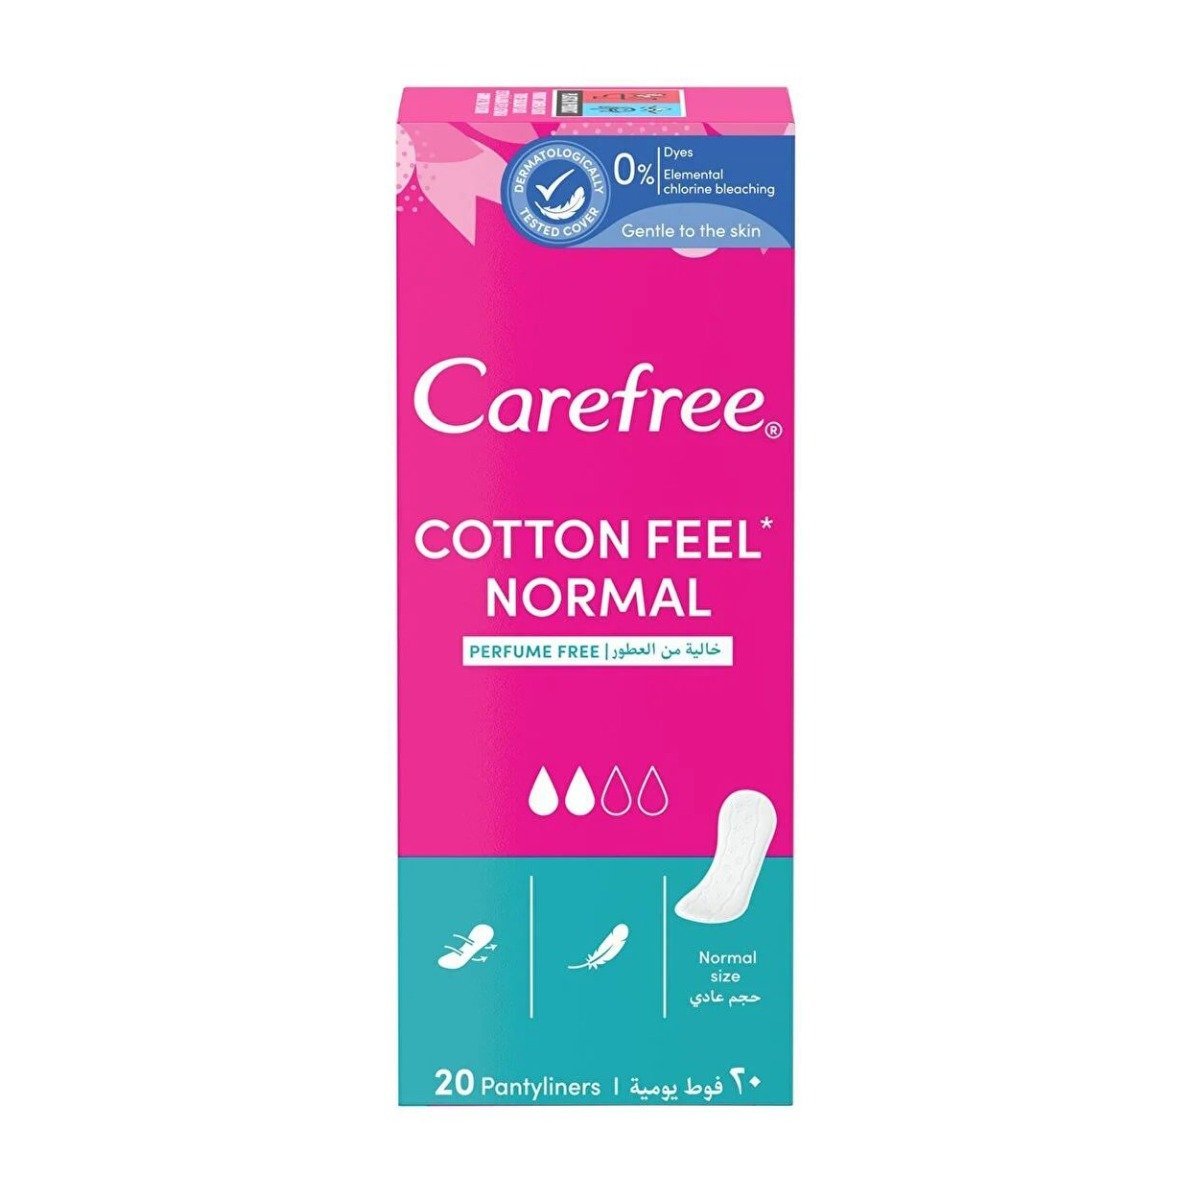 Carefree Cotton Feel Normal Pantyliners – 20pcs - Bloom Pharmacy